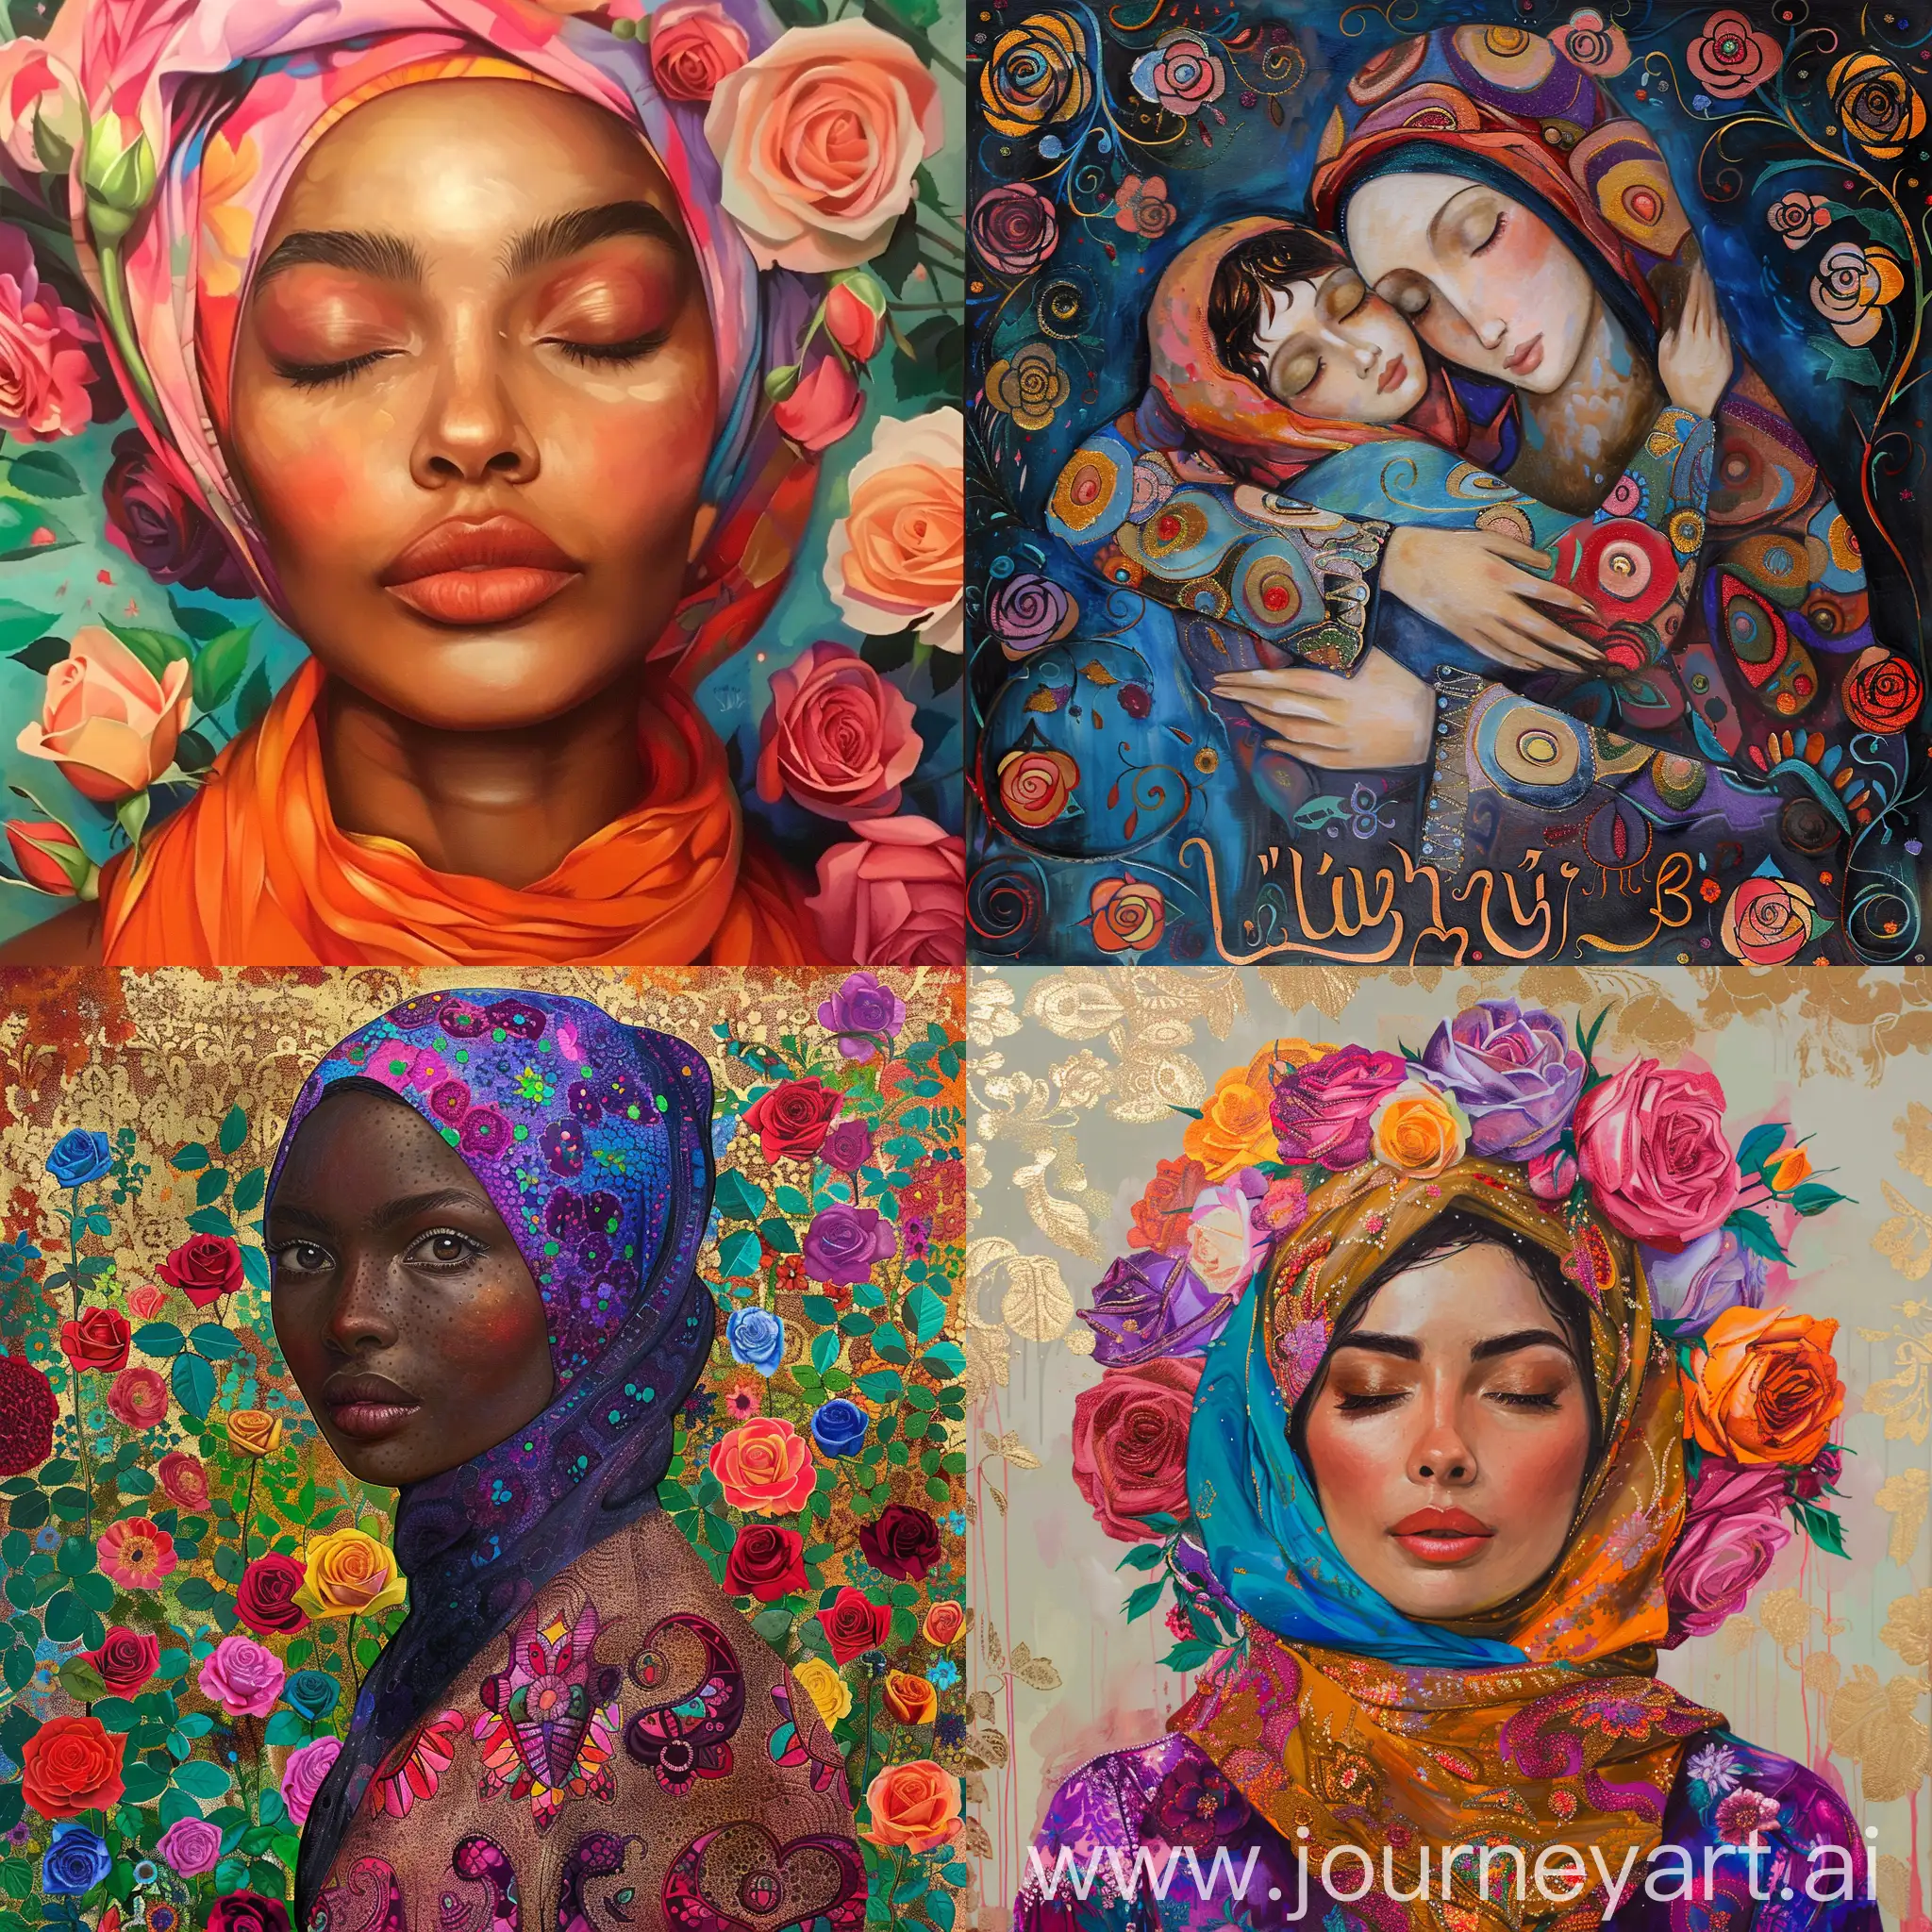  Luqo is the name of Yunus ' mother with bright colors and roses